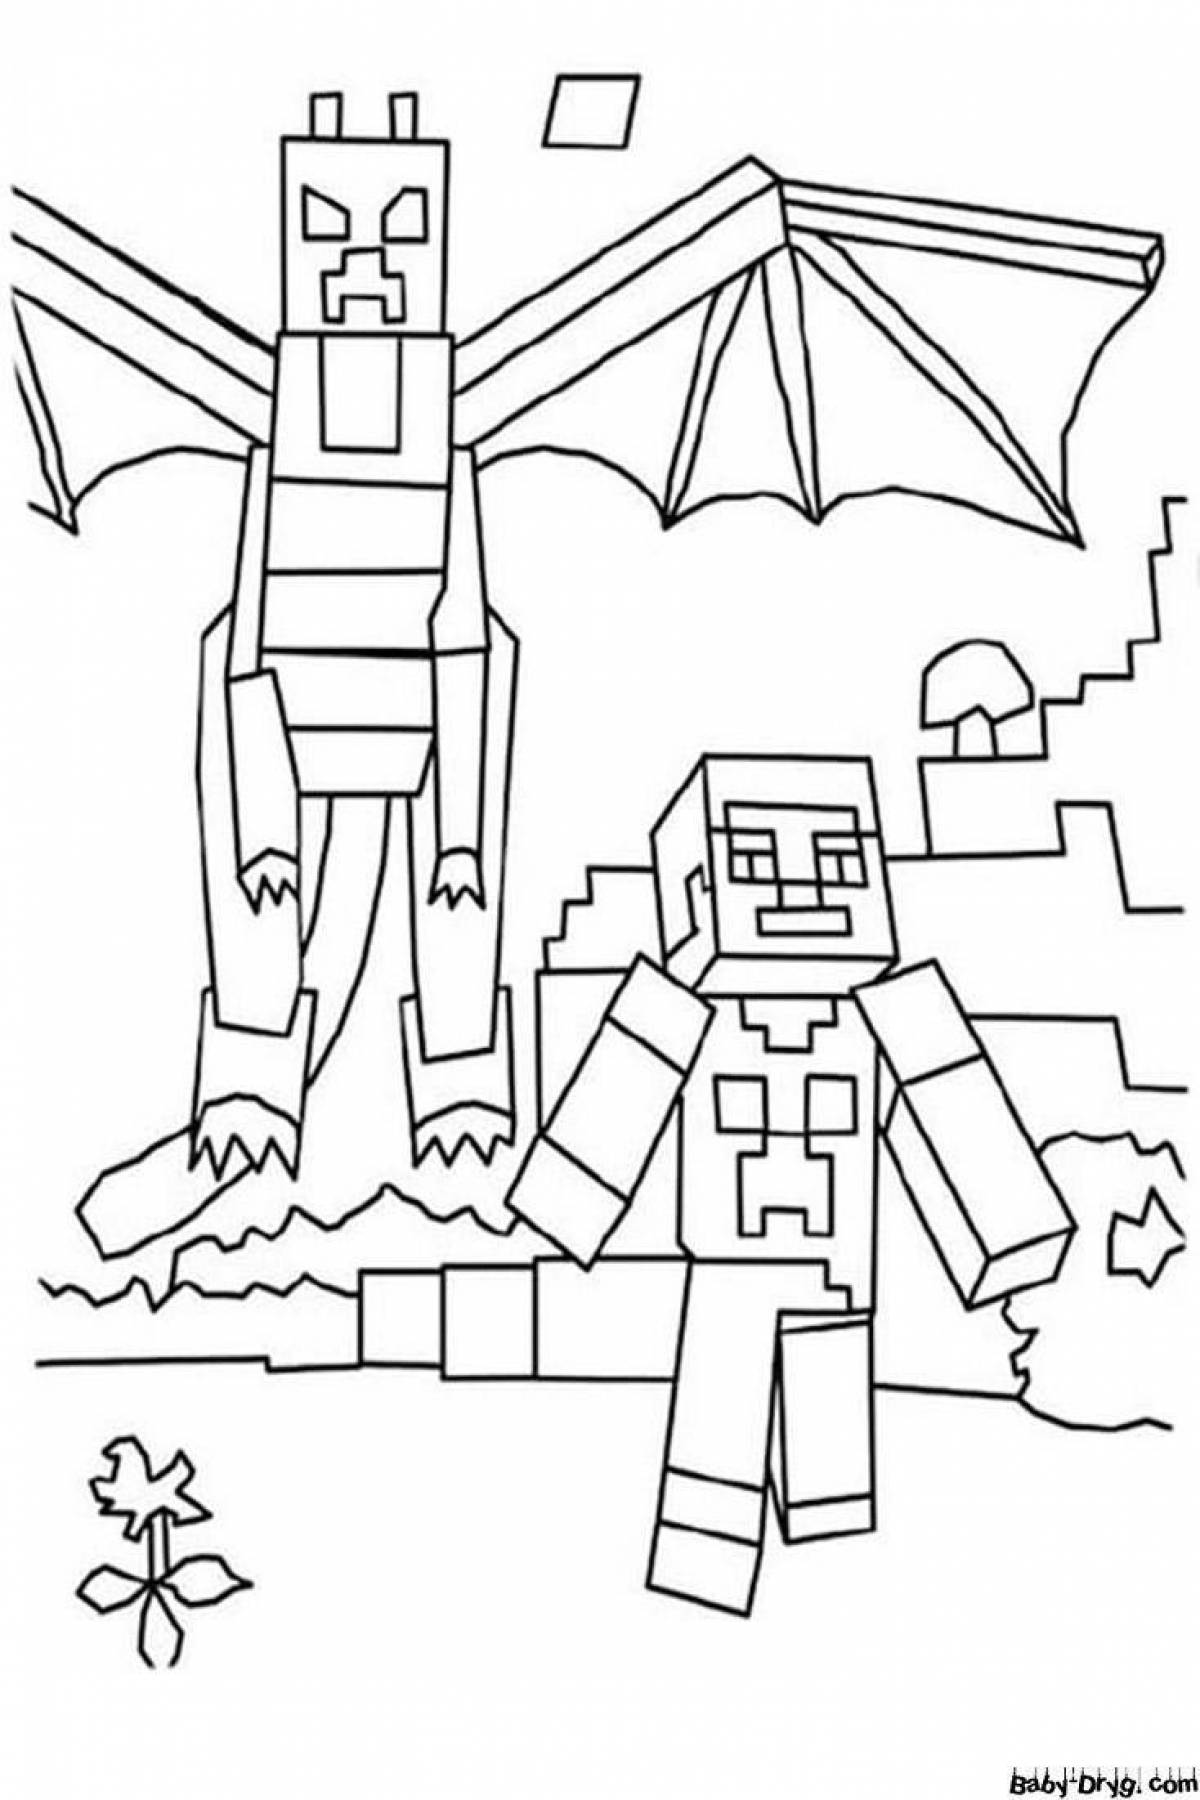 Minecraft player coloring page exploding with color